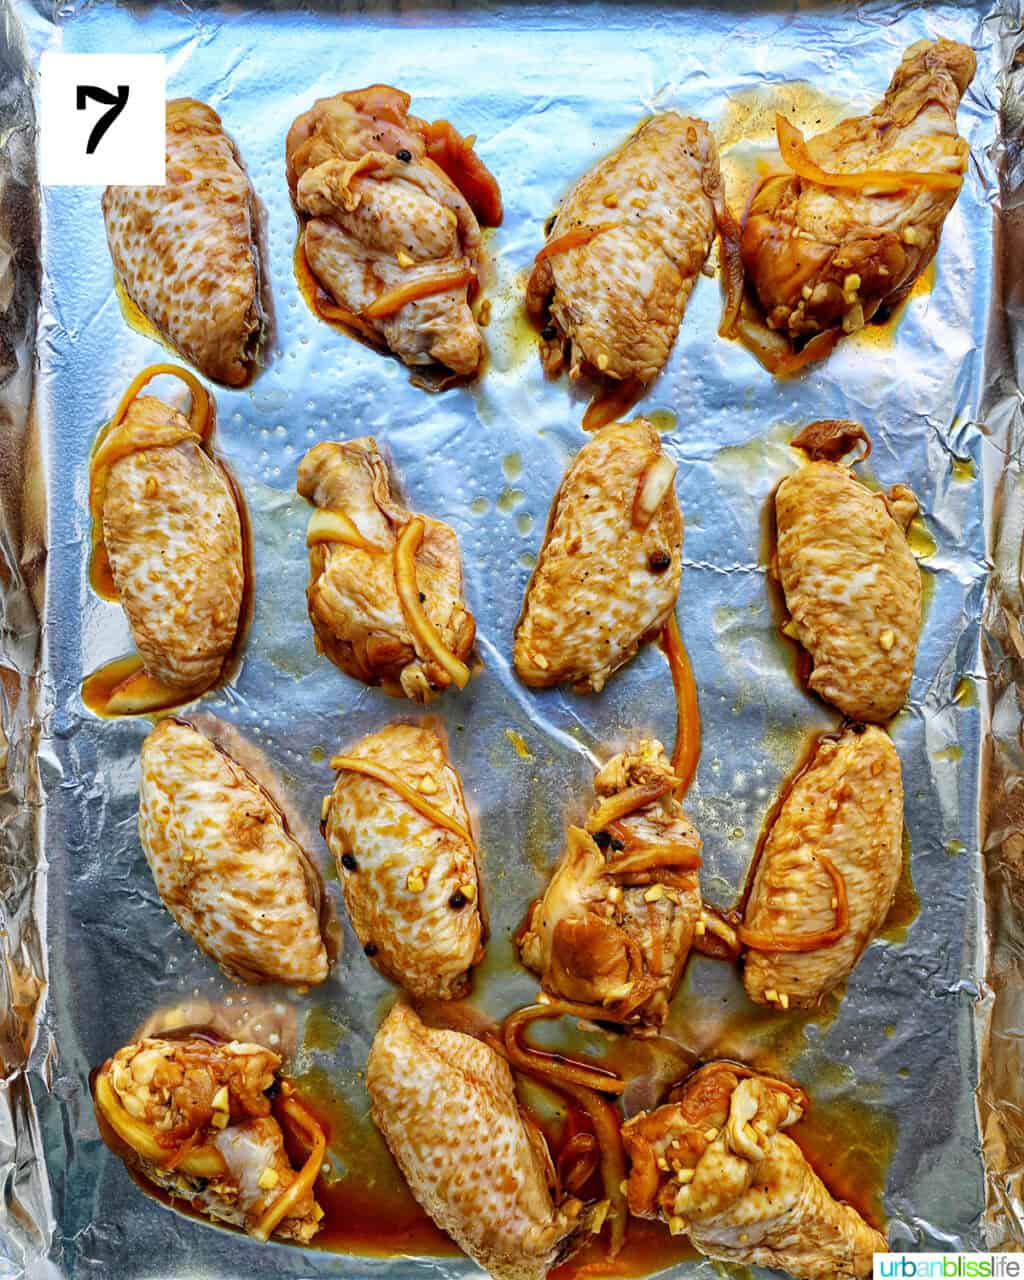 adobo chicken wings on an aluminum foil-covered baking sheet.